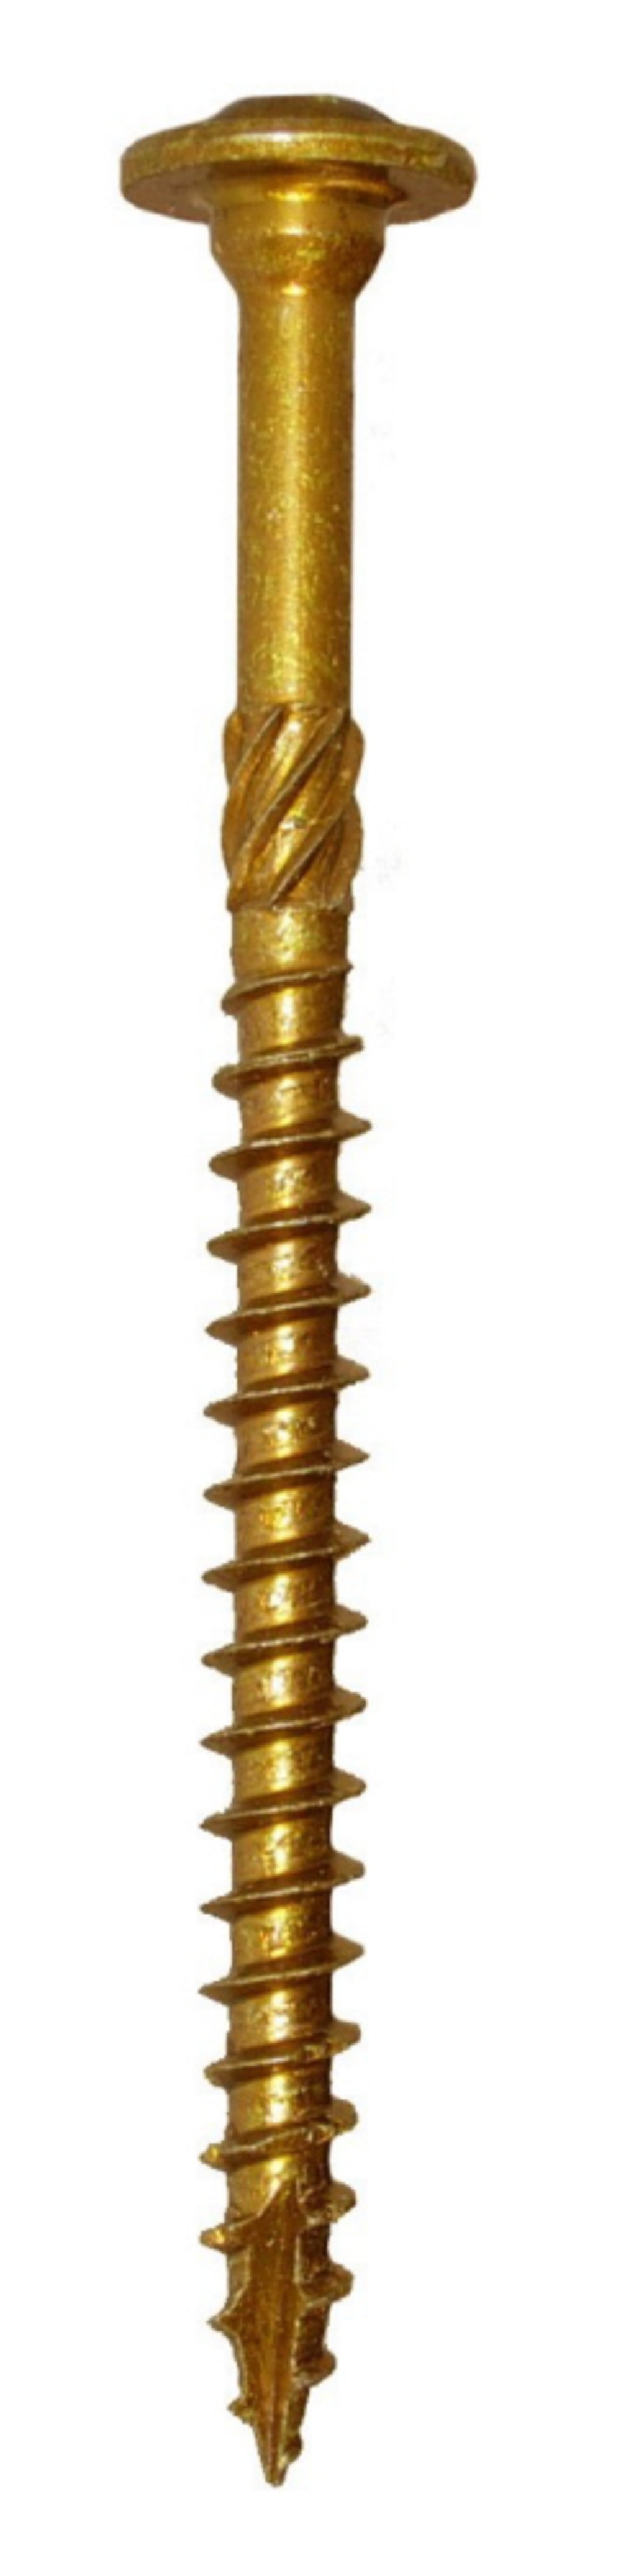 Picture of GRK Fasteners 5913876 Star Self Tapping 0.37 in. Dia. x 8 in. Yellow Zinc Construction Flat Head WoodScrews